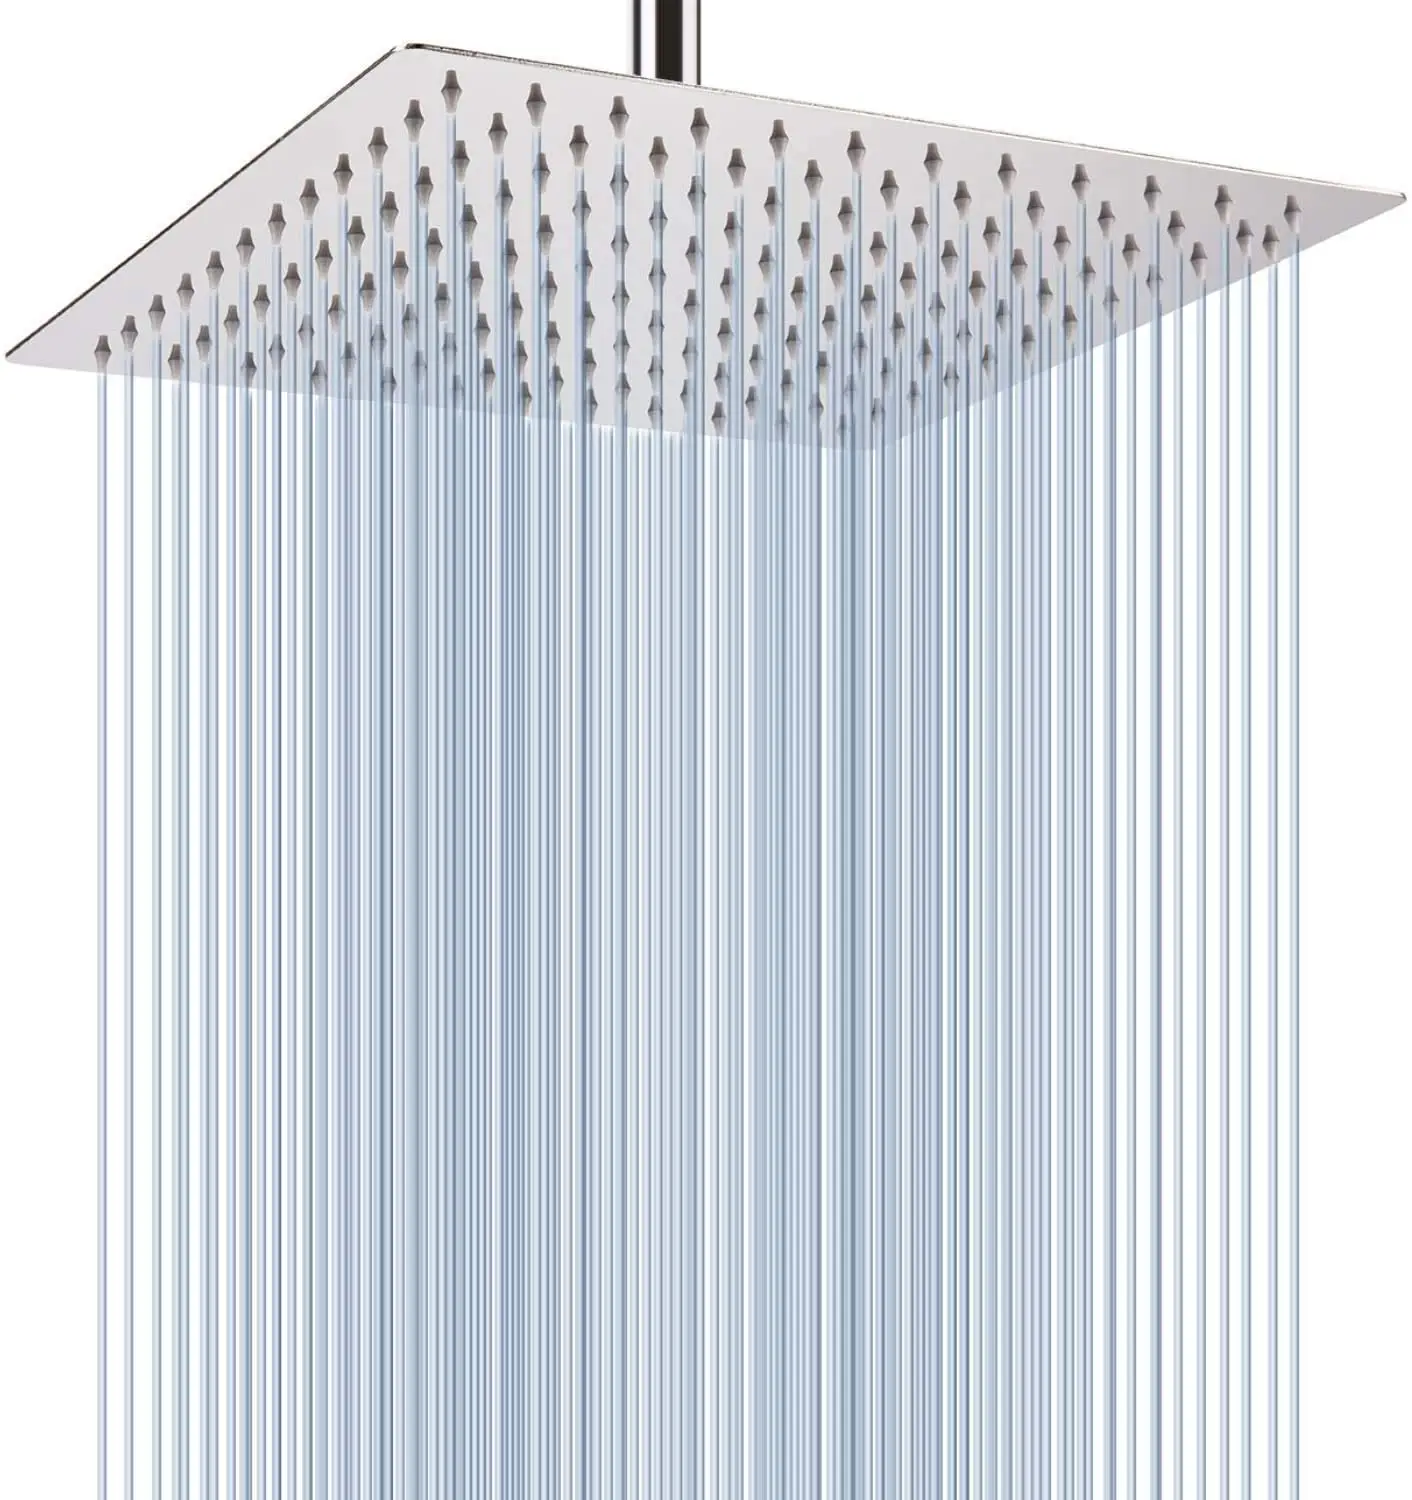 GALENPOO Rain Shower Head 12 Inches Large Rainfall Shower Head Made of 304 Stainless Steel